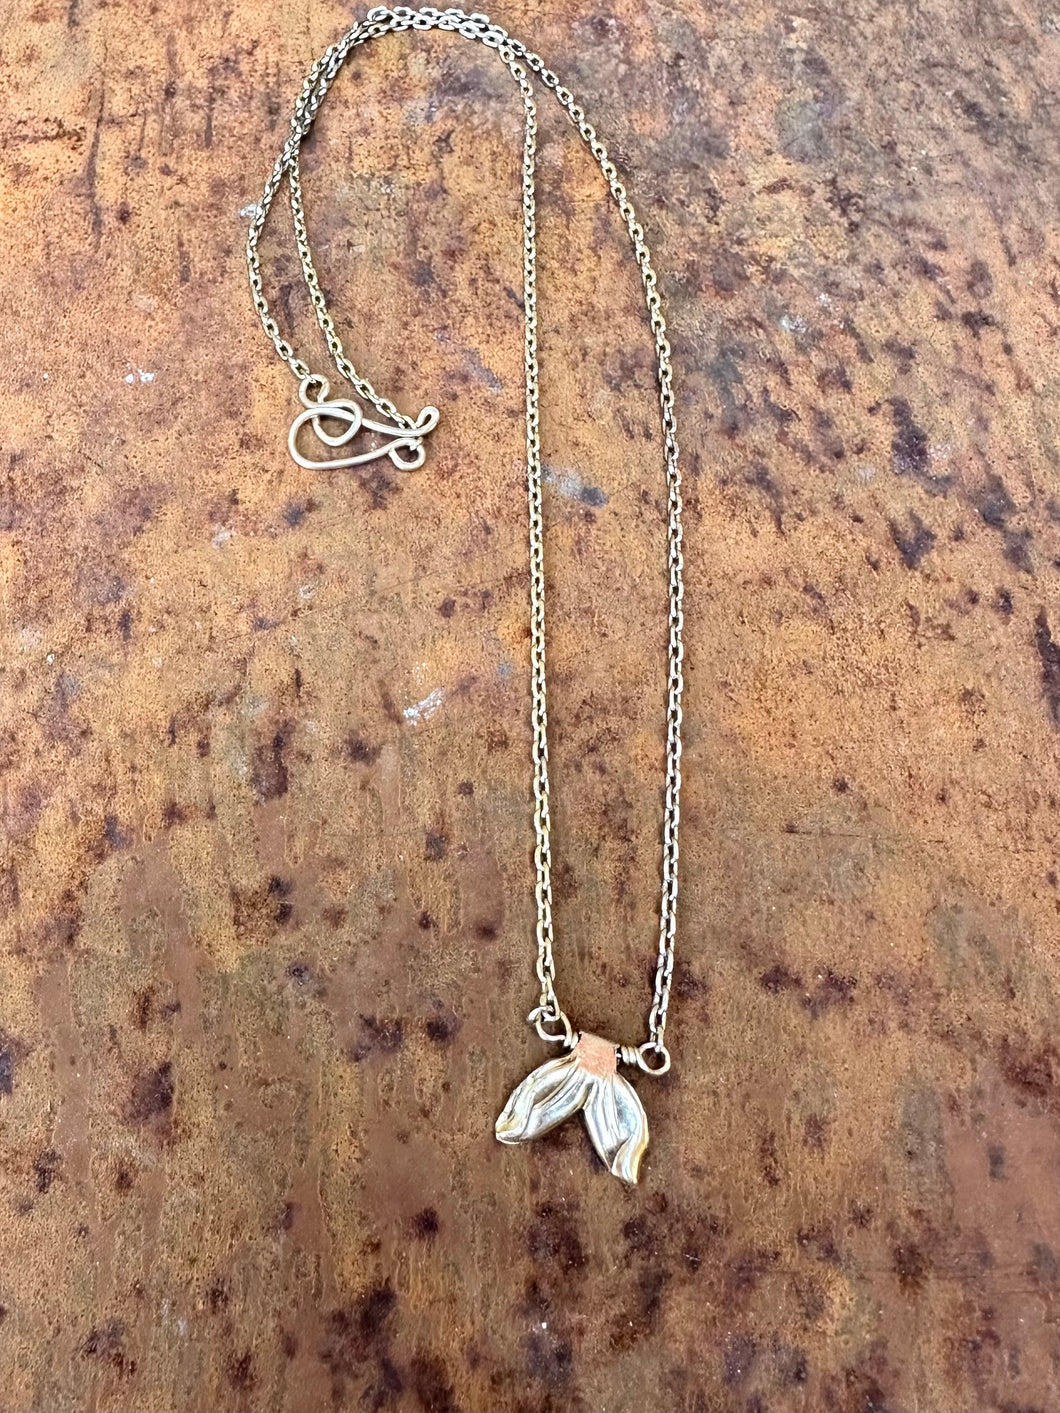 Mermaid Tail necklace